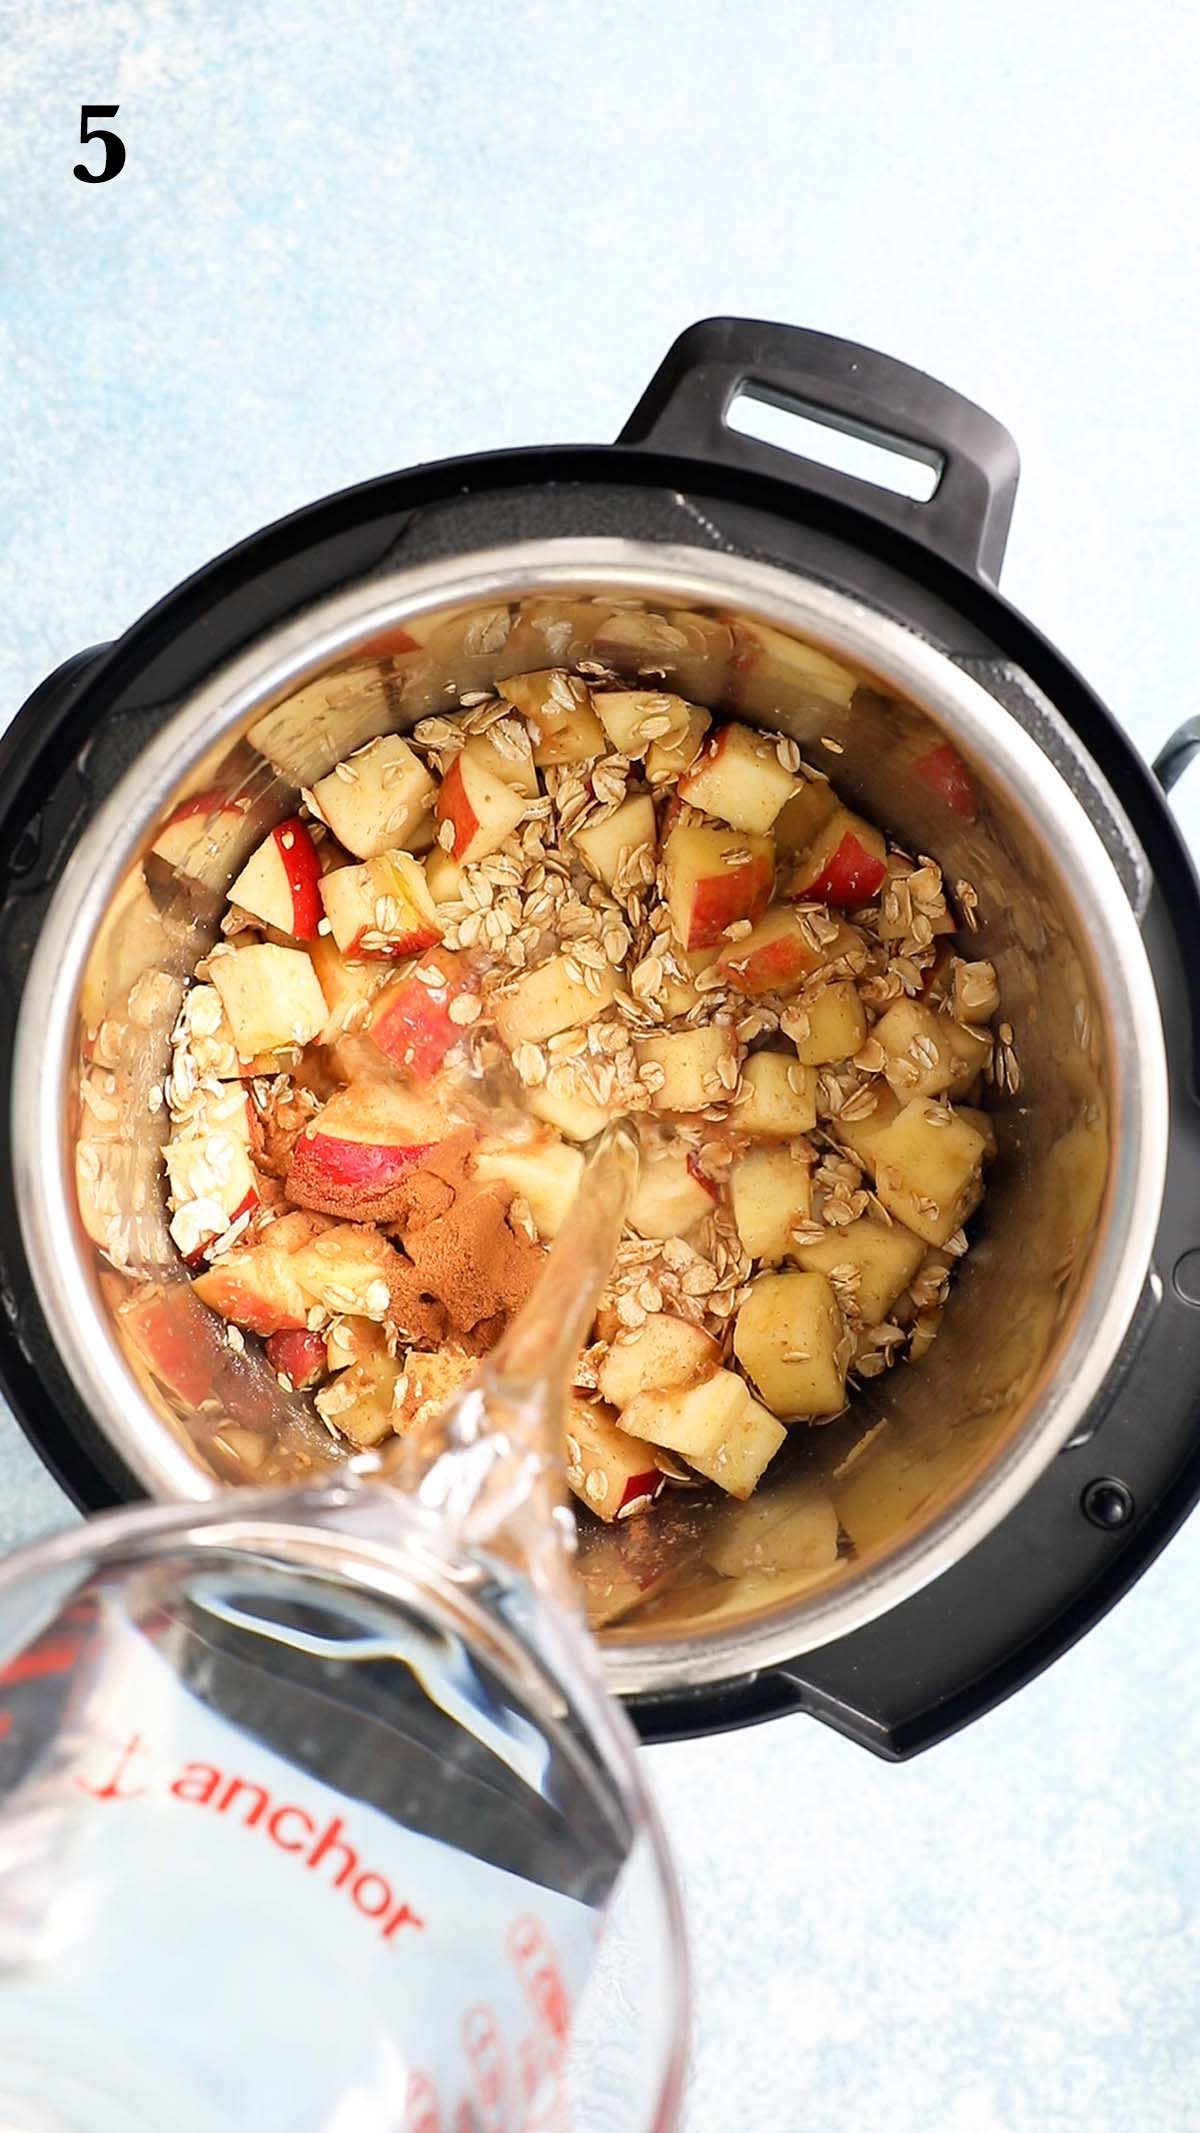 Pouring water into an instant pot with chopped apples and oats.